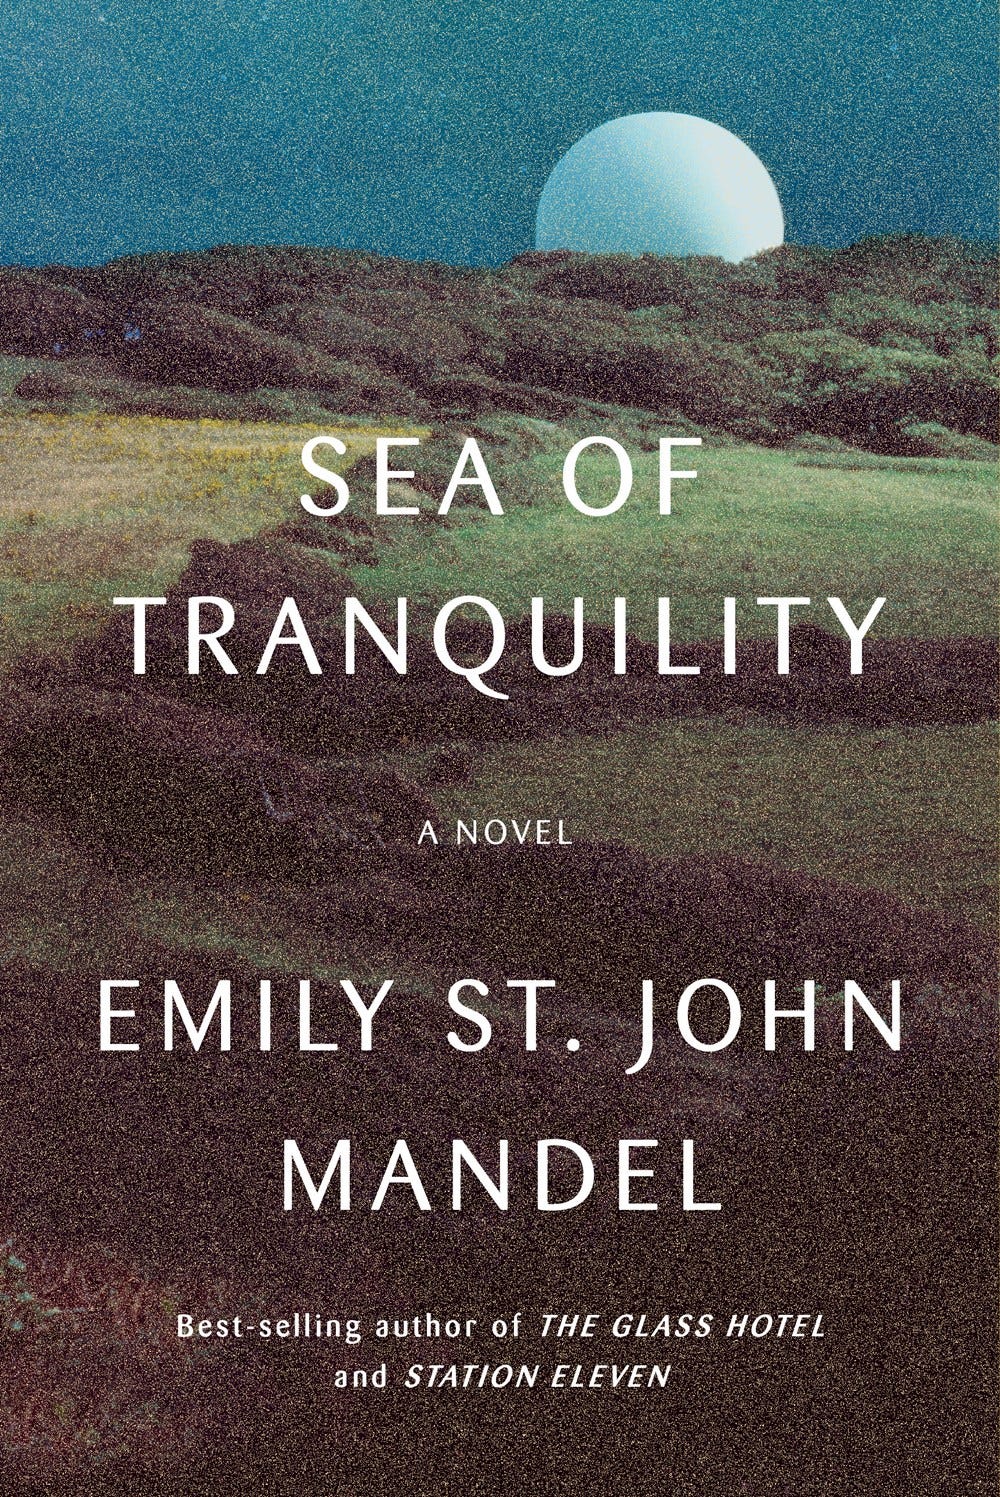 Sea of Tranquility by Emily St. John Mandel | Goodreads